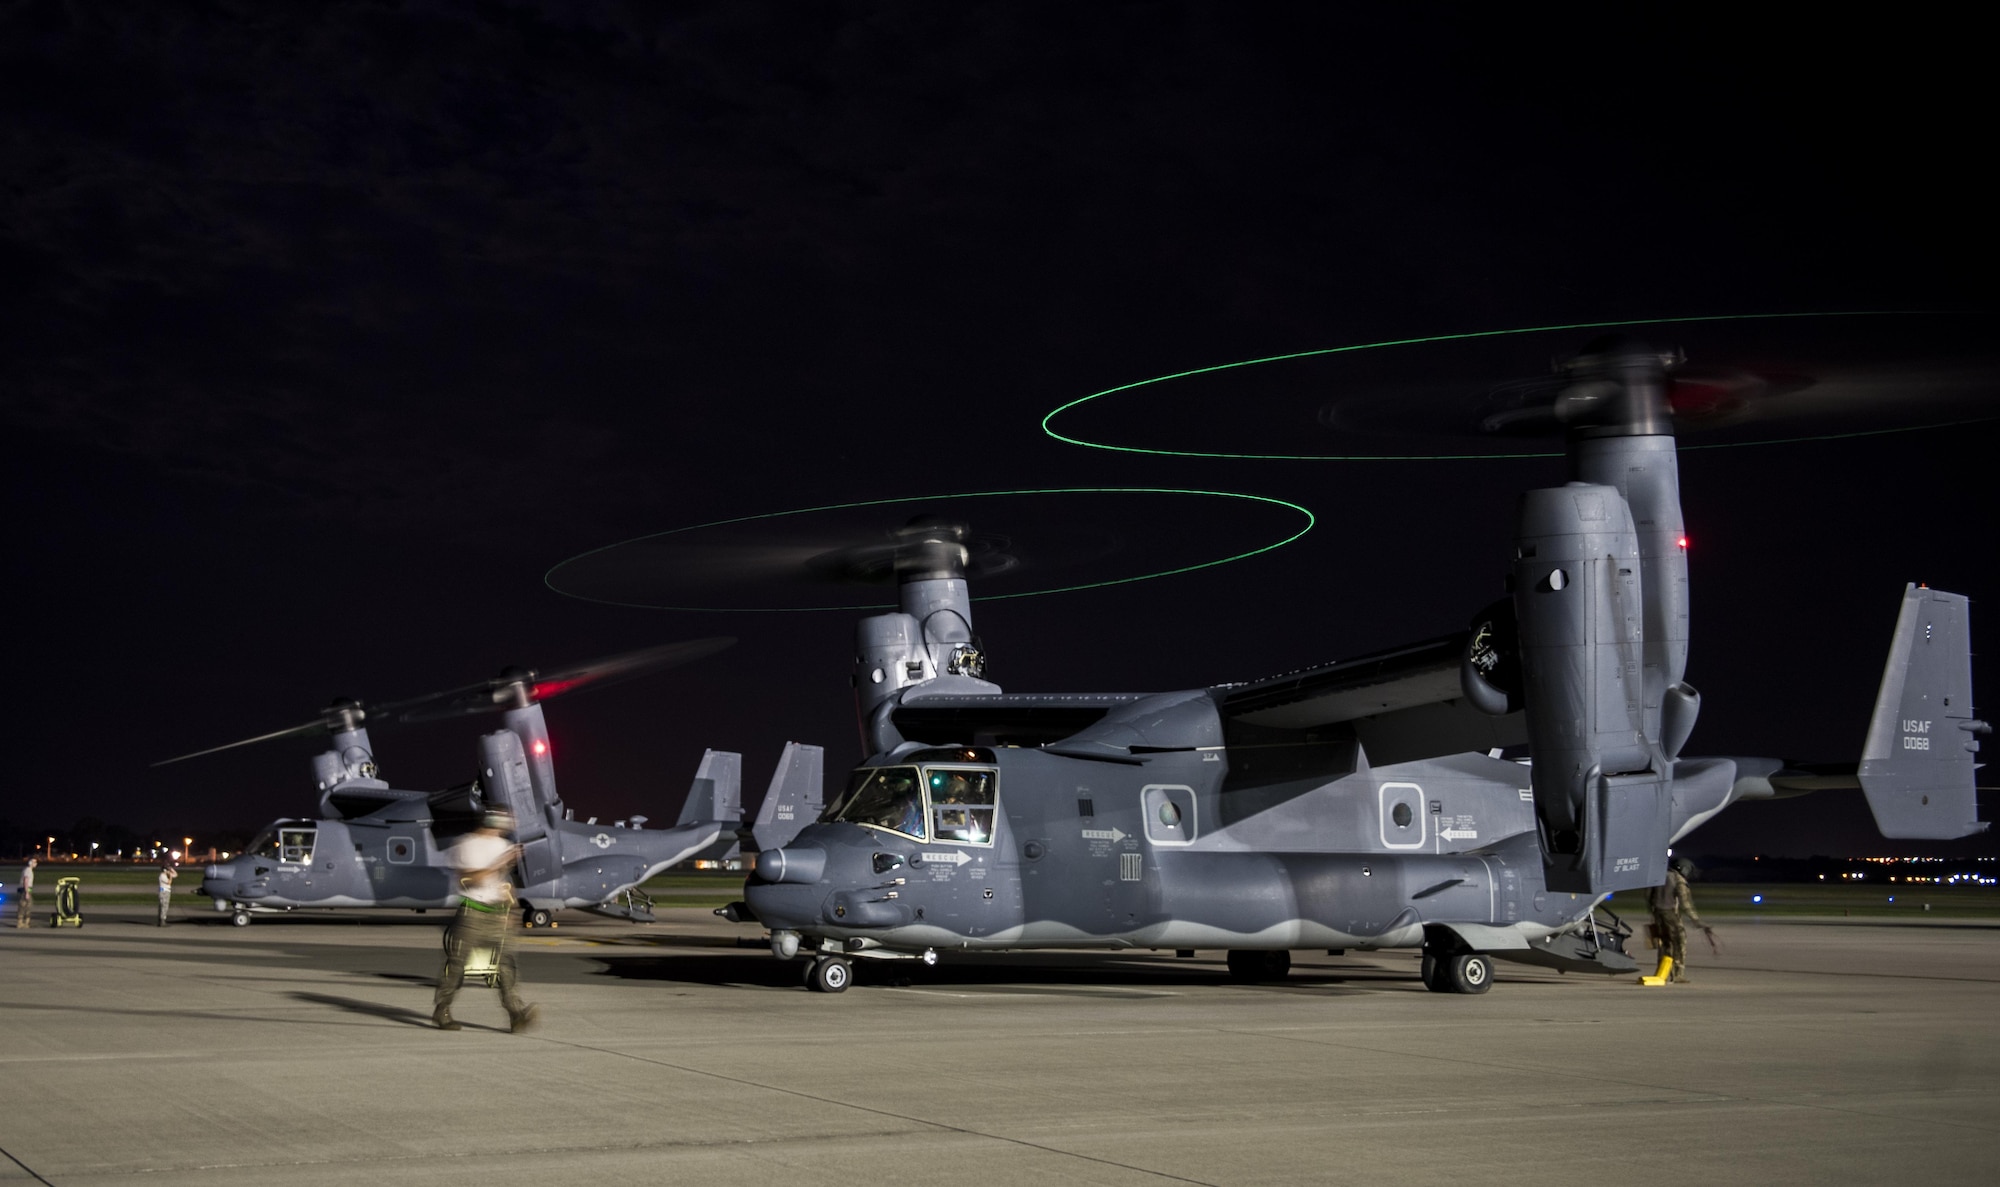 CV-22 Ospreys prepare to shut down after conducting a simulated contingency operations during Task Force Exercise Olympus Archer at Wright Patterson Air Force Base, Ohio, Aug. 17, 2016. Olympus Archer provides training opportunities for more than 230 Air Commandos, with an emphasis on medical and flying operations. (U.S. Air Force photo by Staff Sgt. Christopher Callaway)